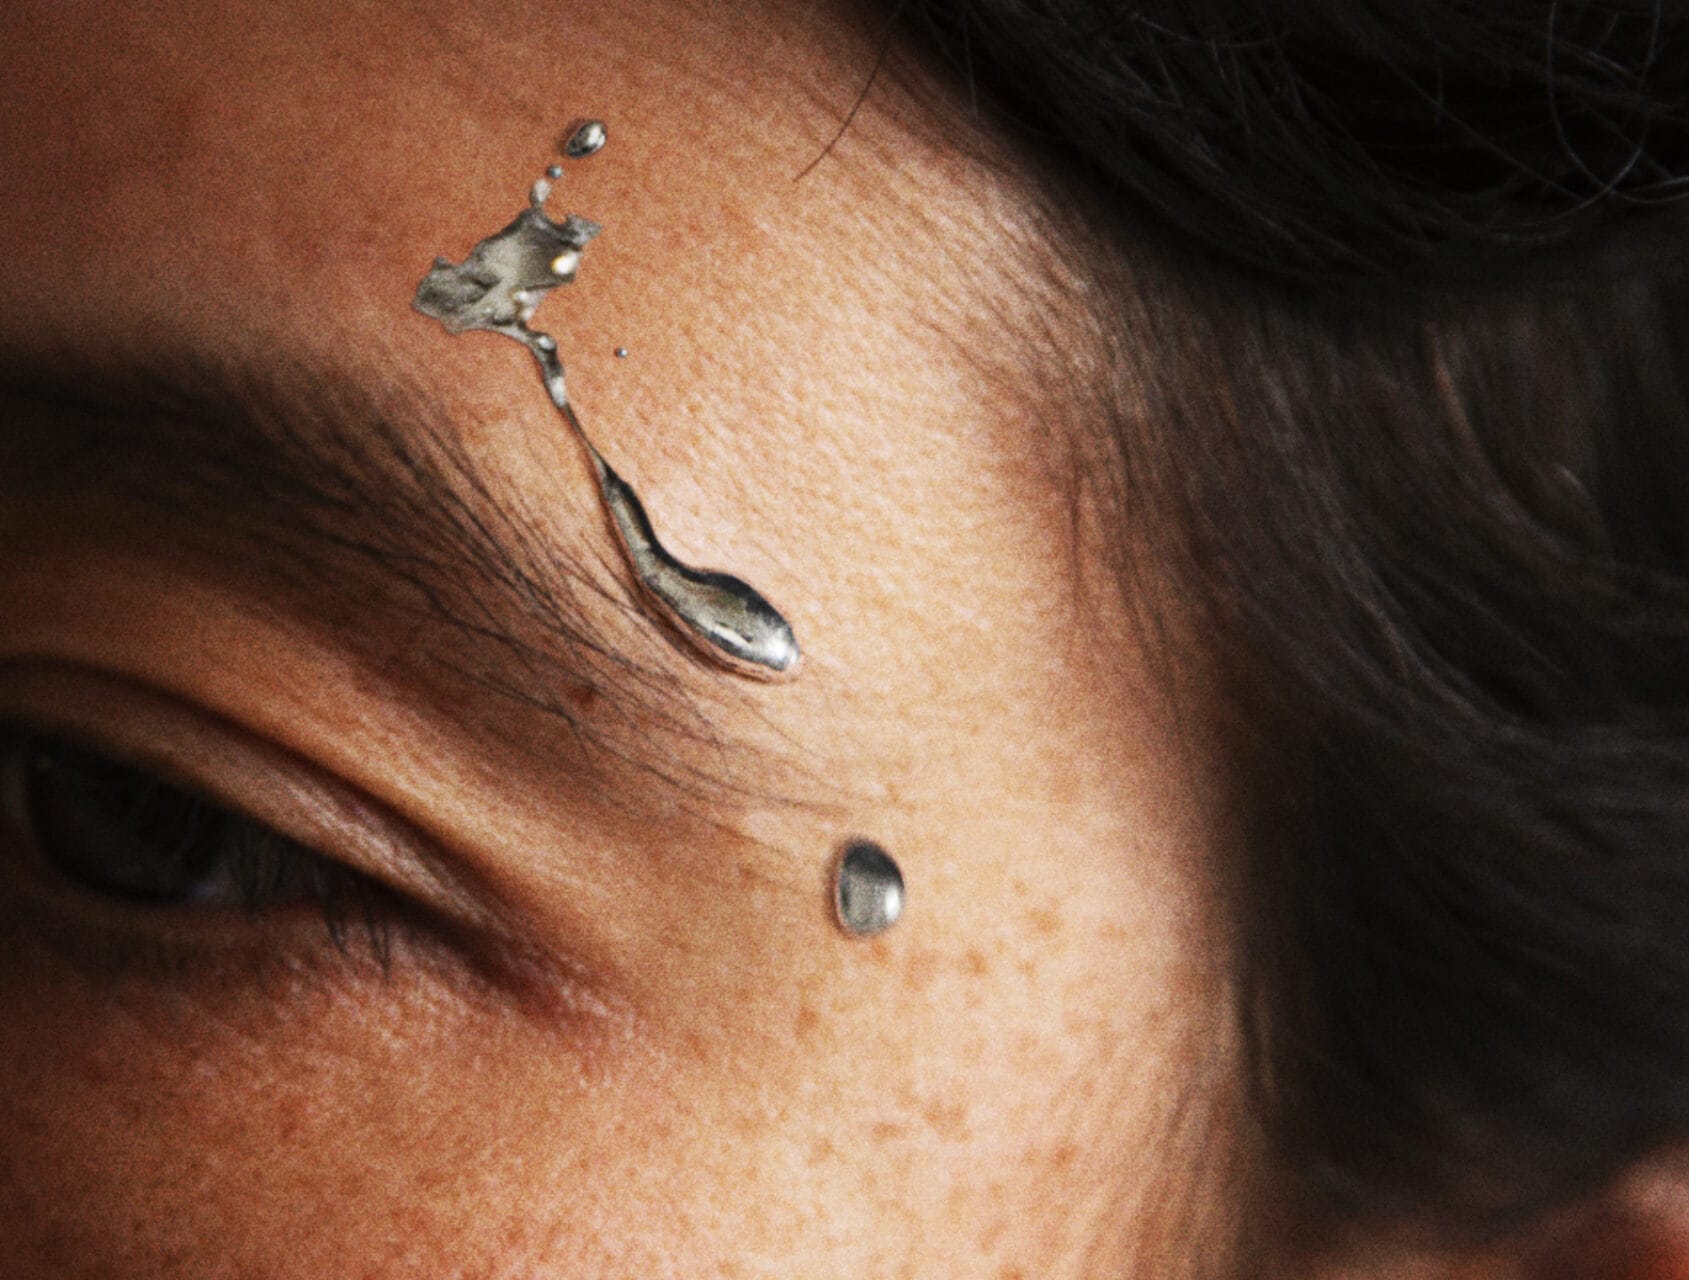 Image description: A very close up photo of a face with droplets of silver metal above the eyebrow.